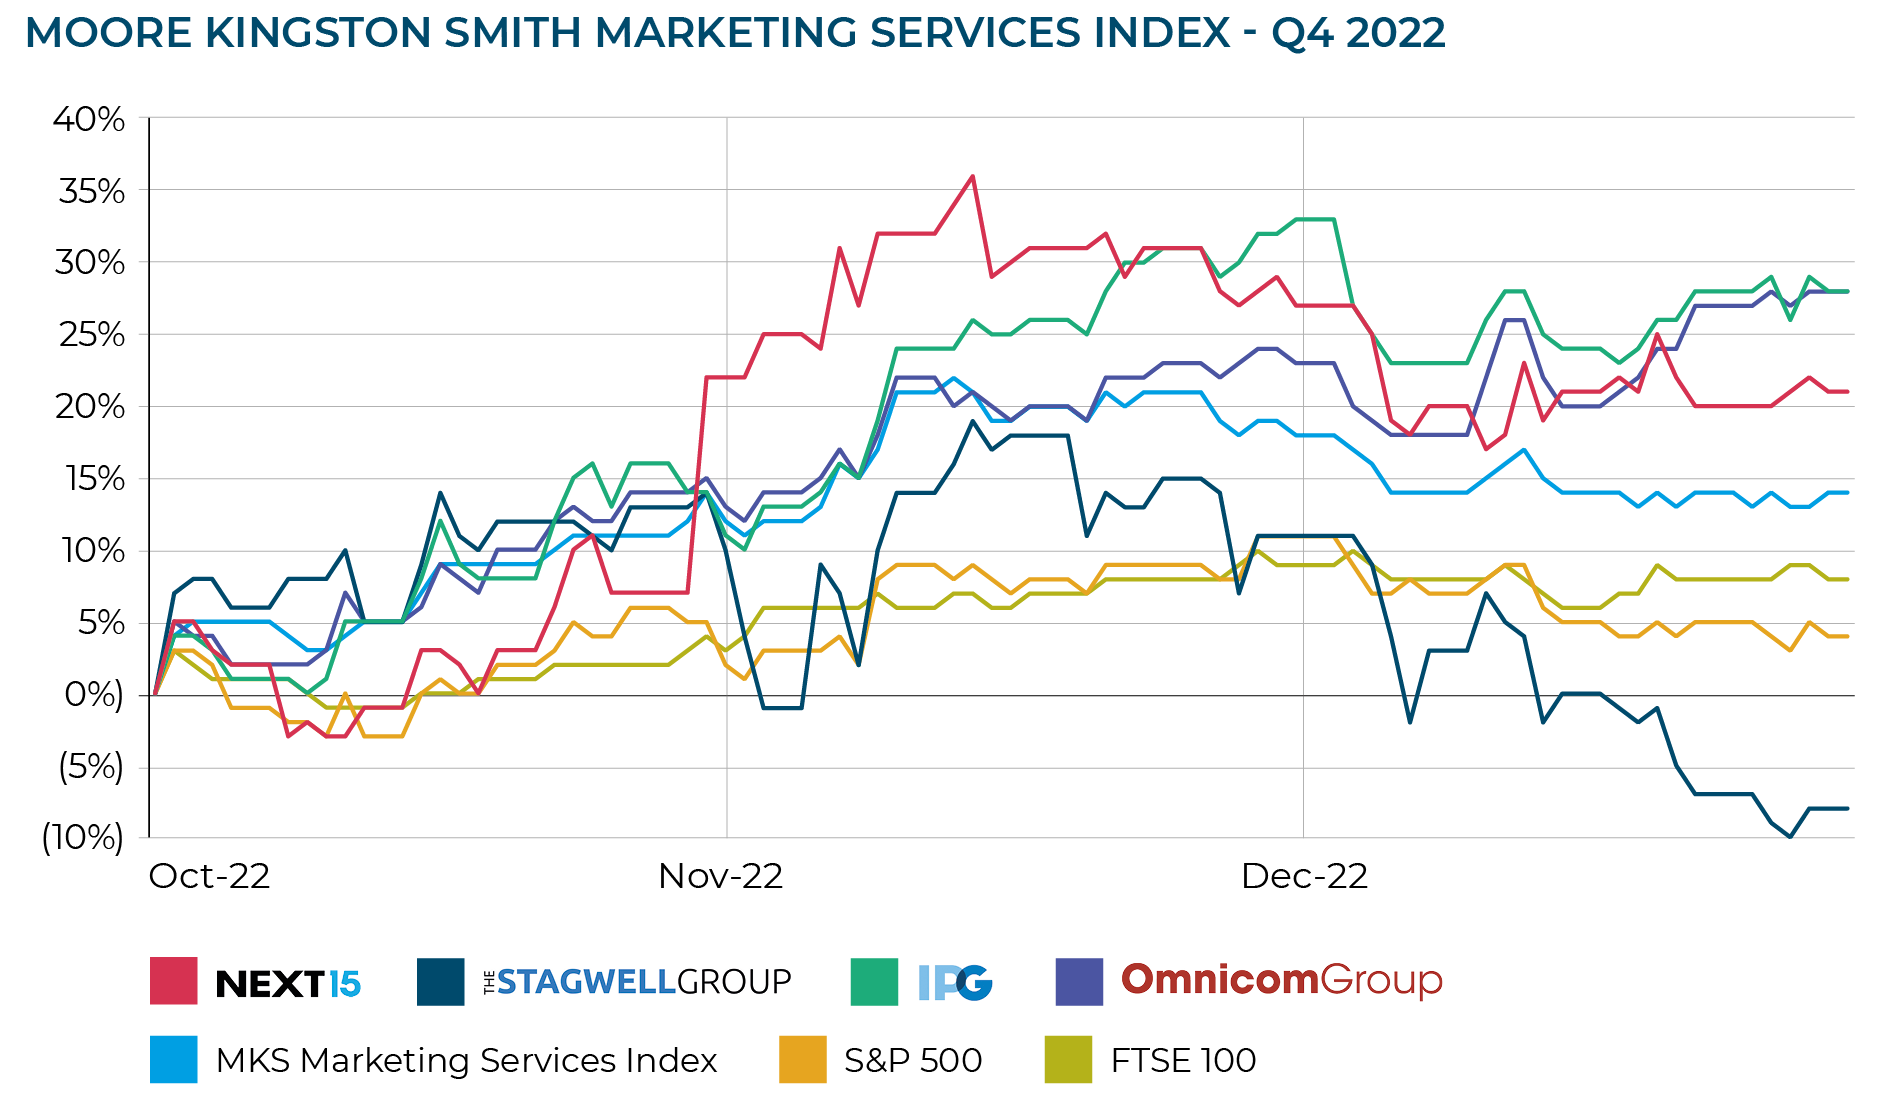 MOORE KINGSTON SMITH MARKETING SERVICES INDEX - Q4 2022